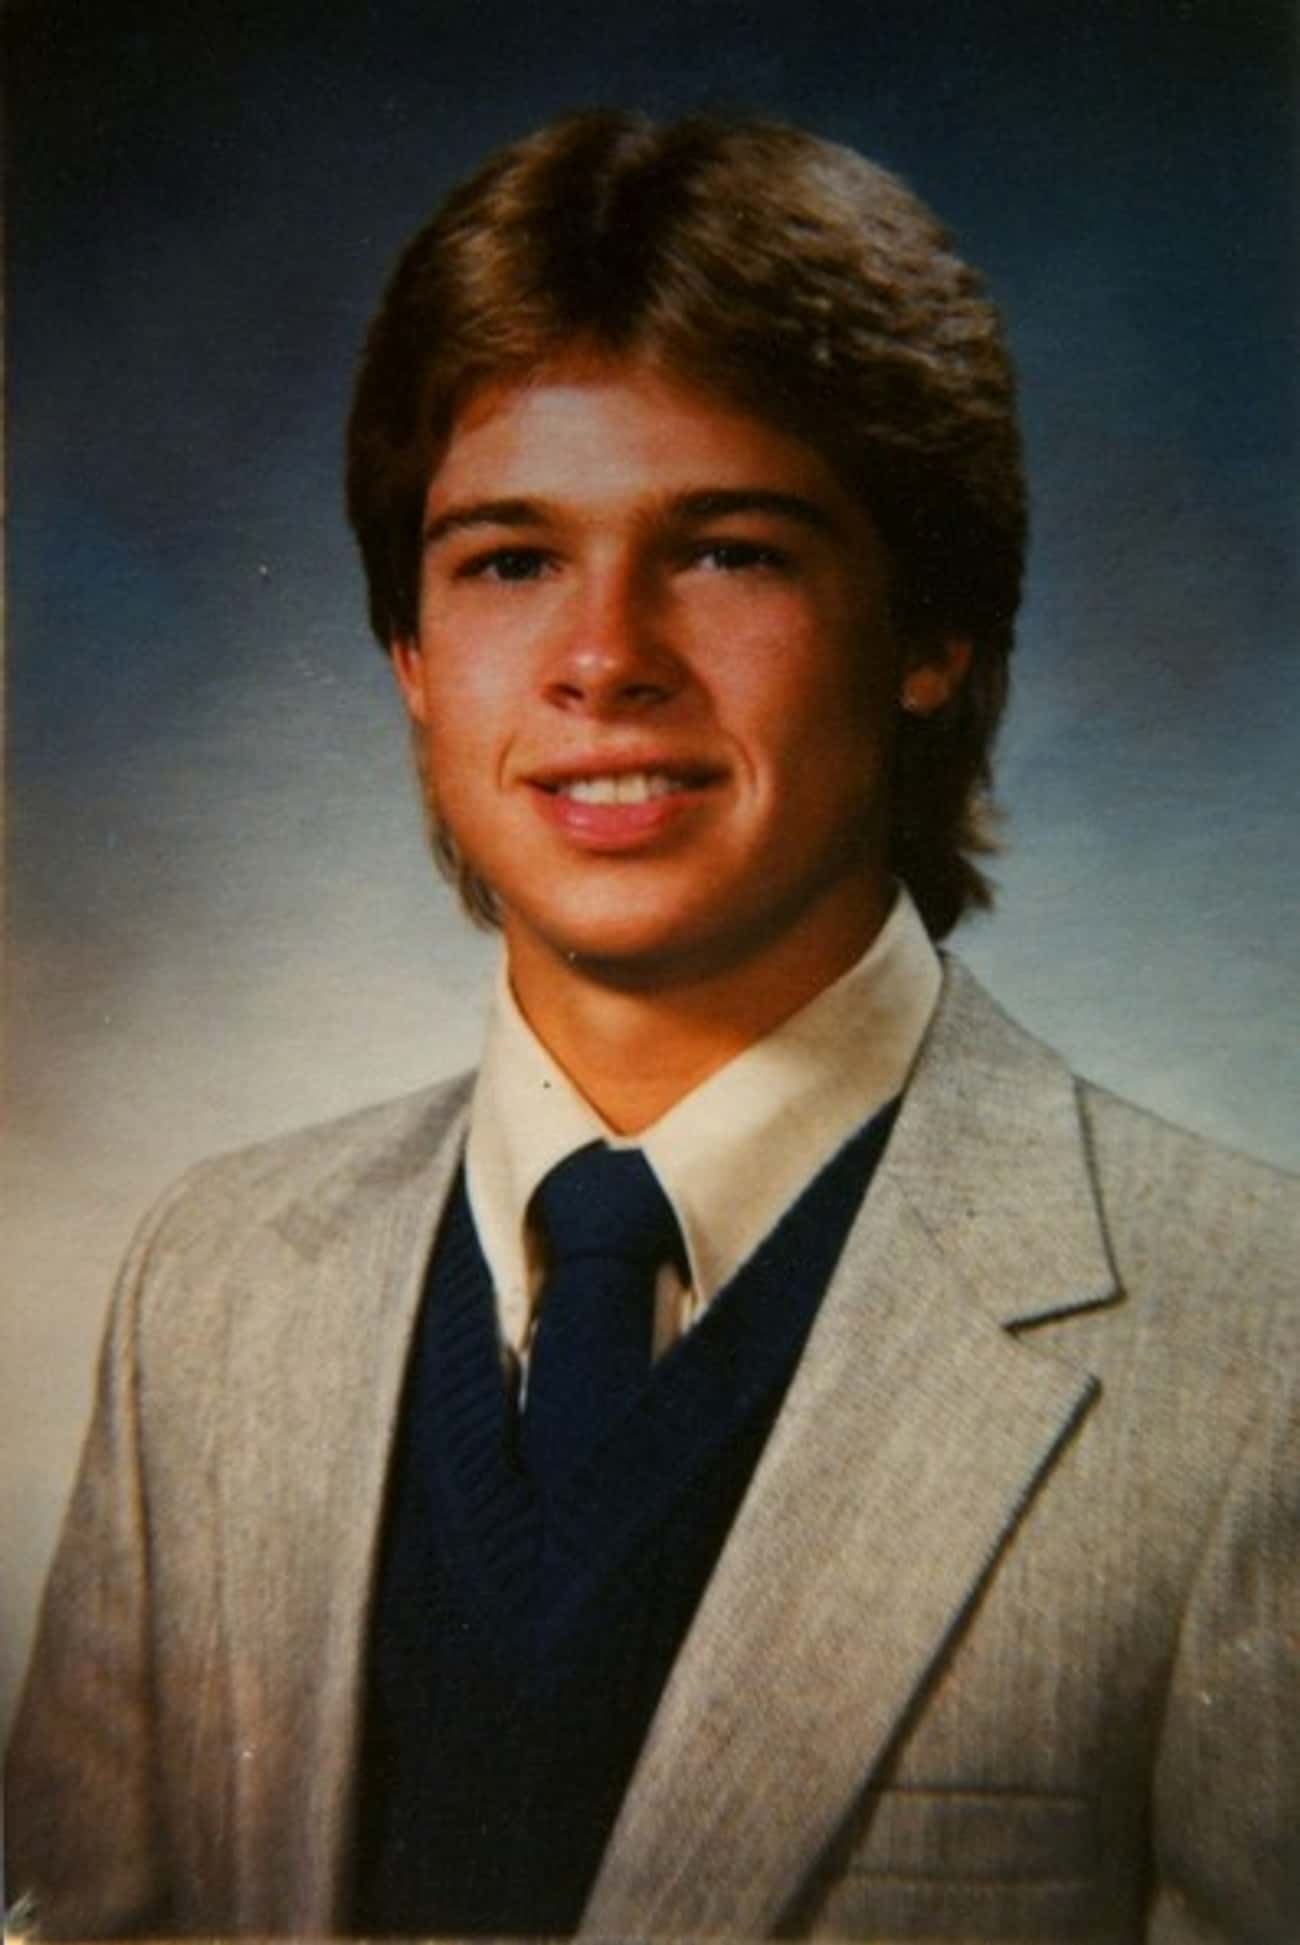 Young Brad Pitt&#39;s Mom Begged Him to Get a Haircut Before Senior Photos, But Naturally, He Refused